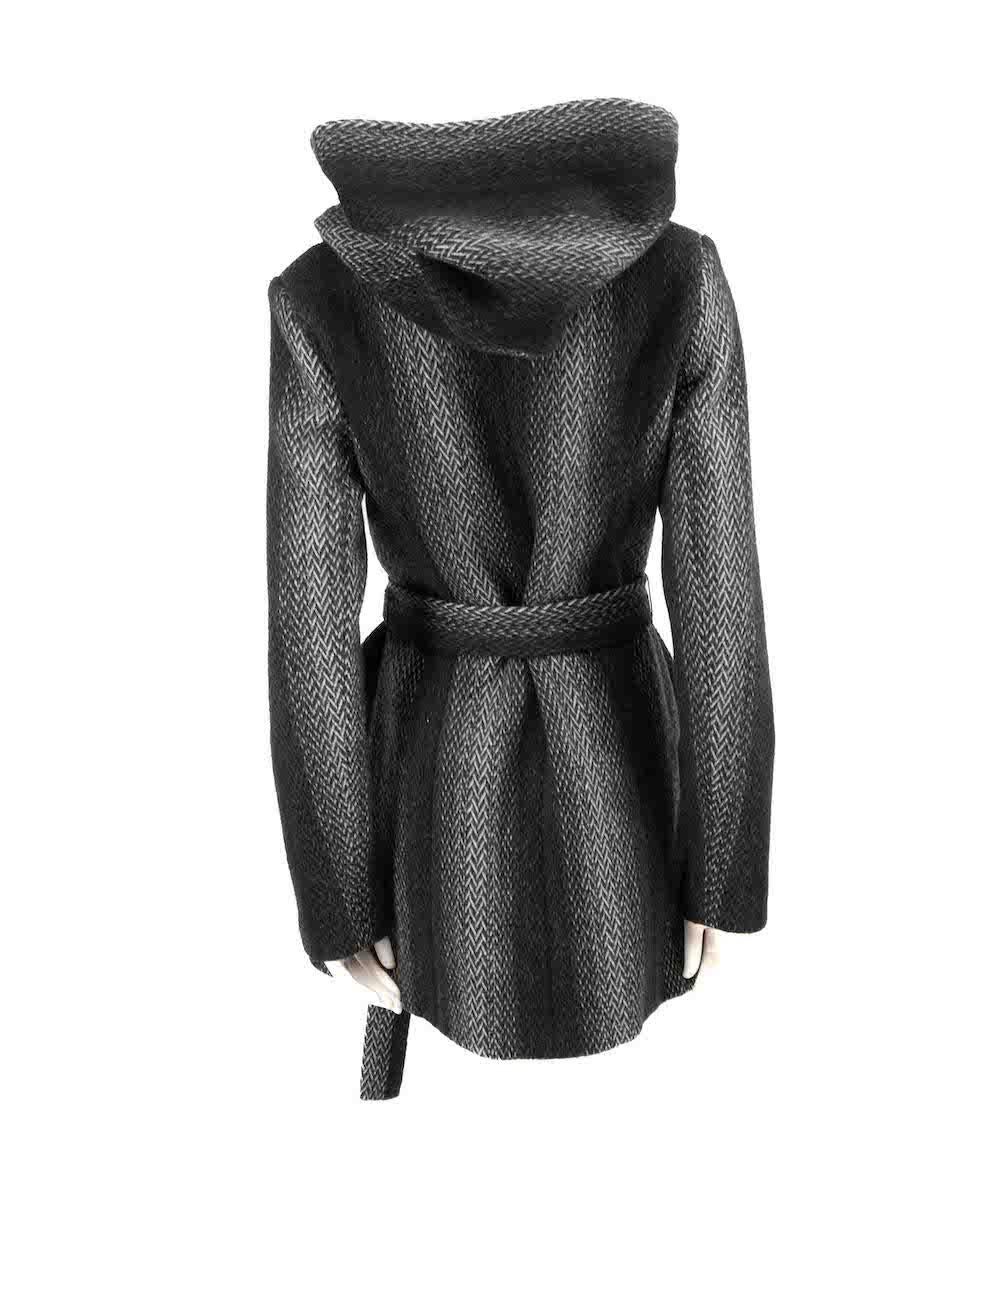 Christian Siriano Grey Wool Ombré Stripe Belted Coat Size L In Good Condition For Sale In London, GB